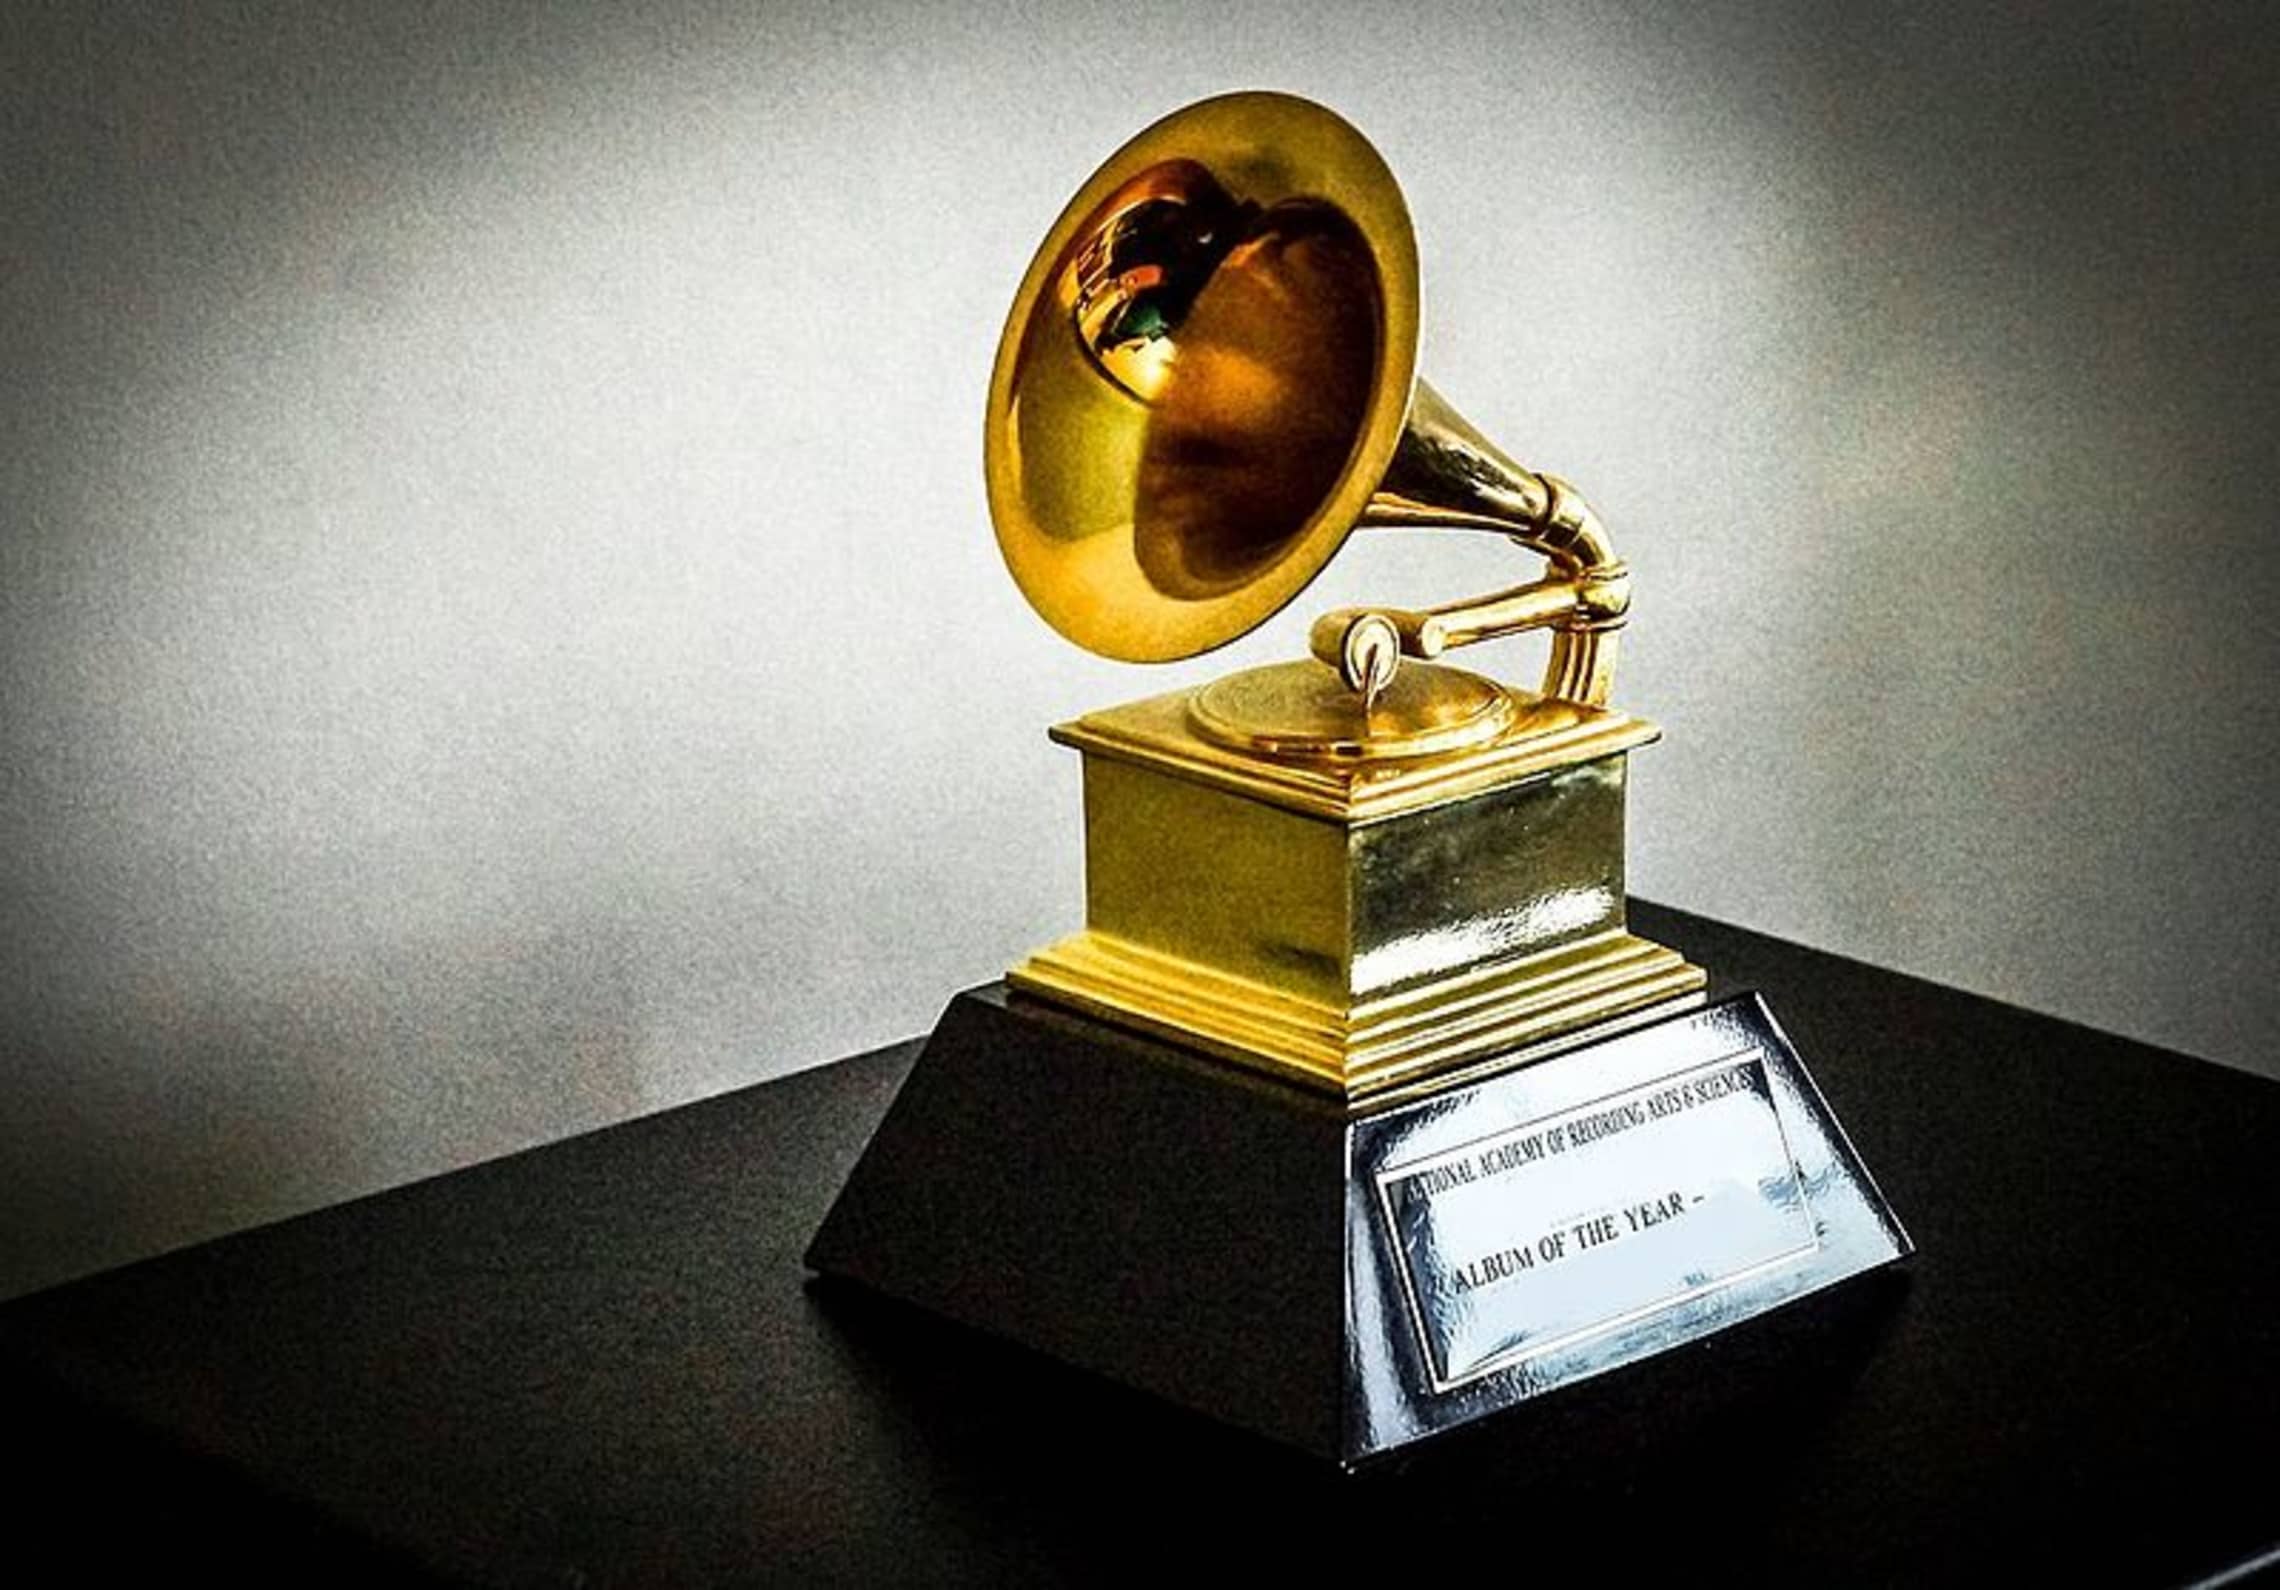 Select 2019 Grammy Awards nominees will be initially announced